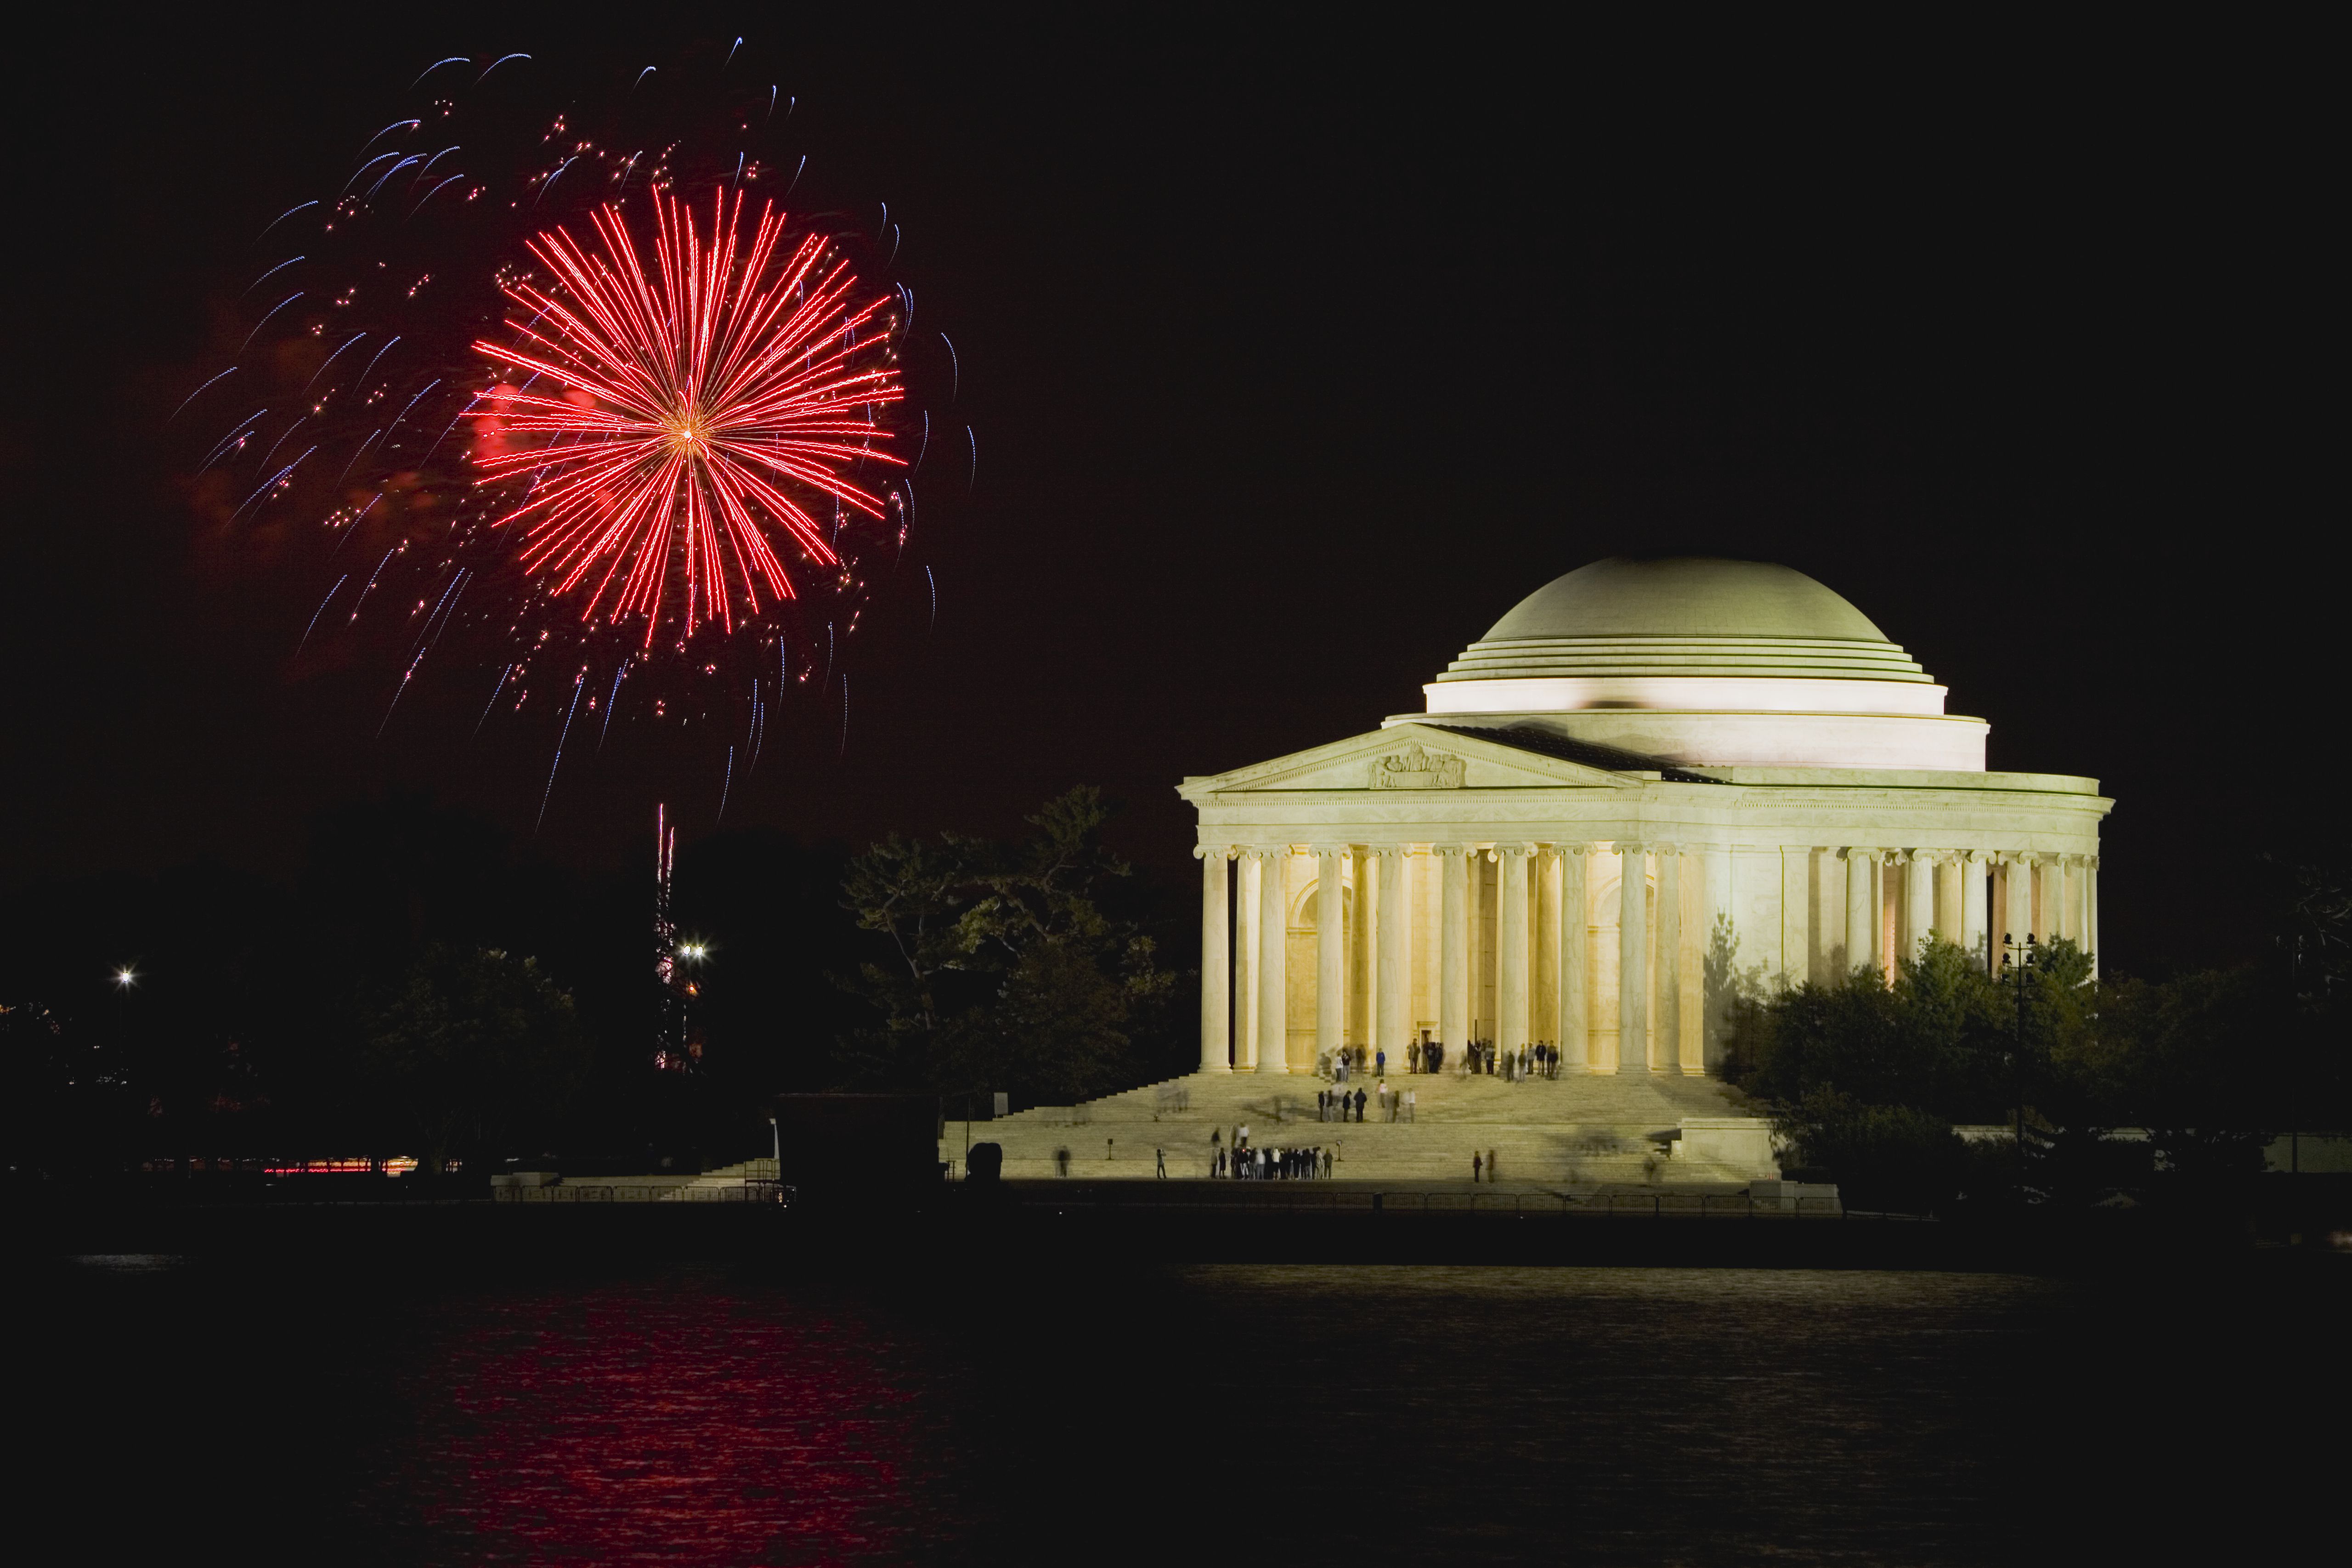 July 2018 Festivals and Events in the Washington, D.C. Area